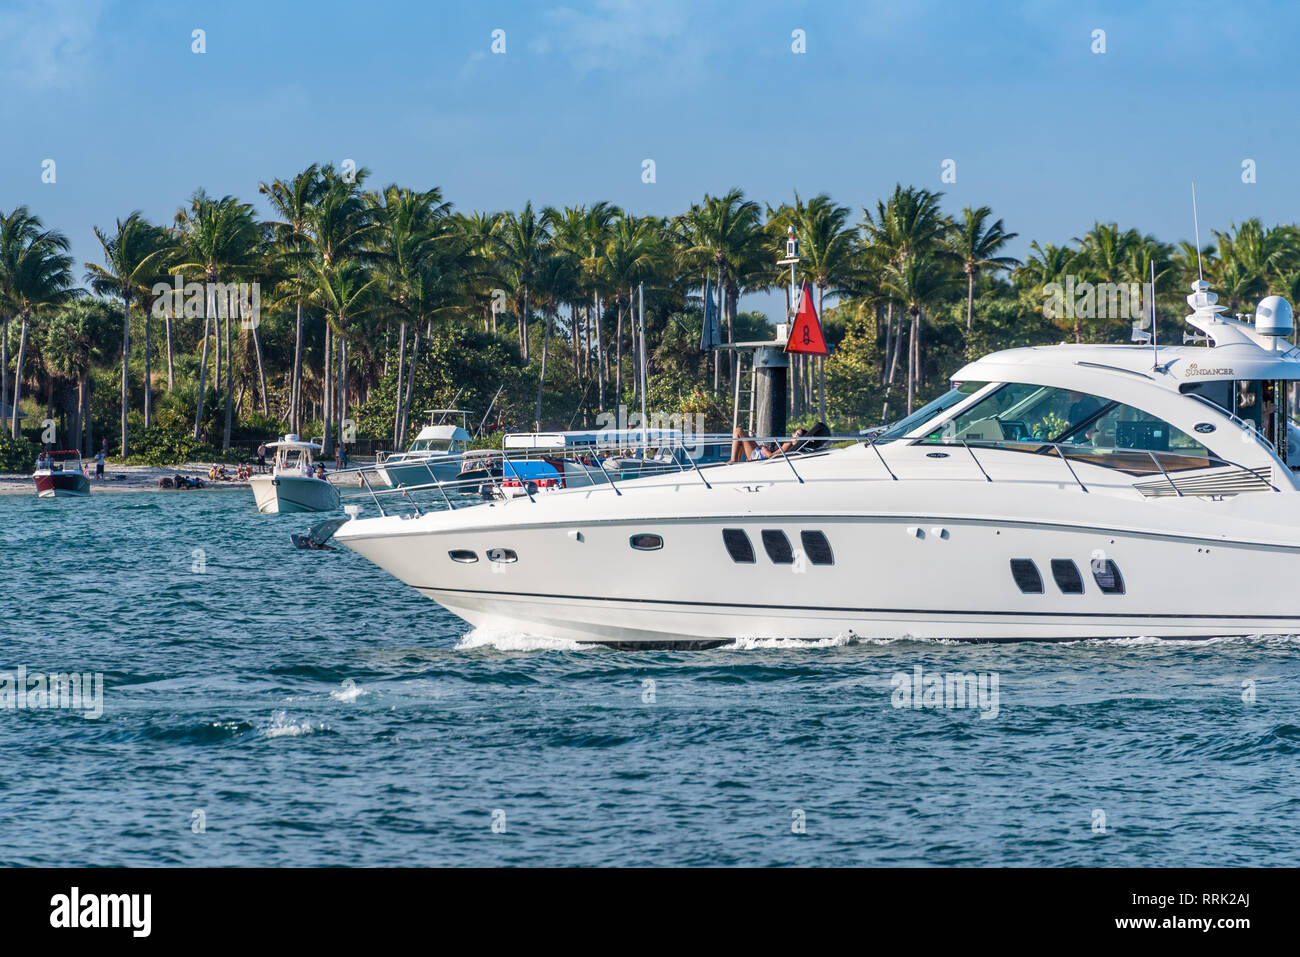 People and boats gather around Peanut Island, just off of Palm Beach in the Intracoastal Waterway at the Palm Beach Inlet in Palm Beach, Florida. Stock Photo